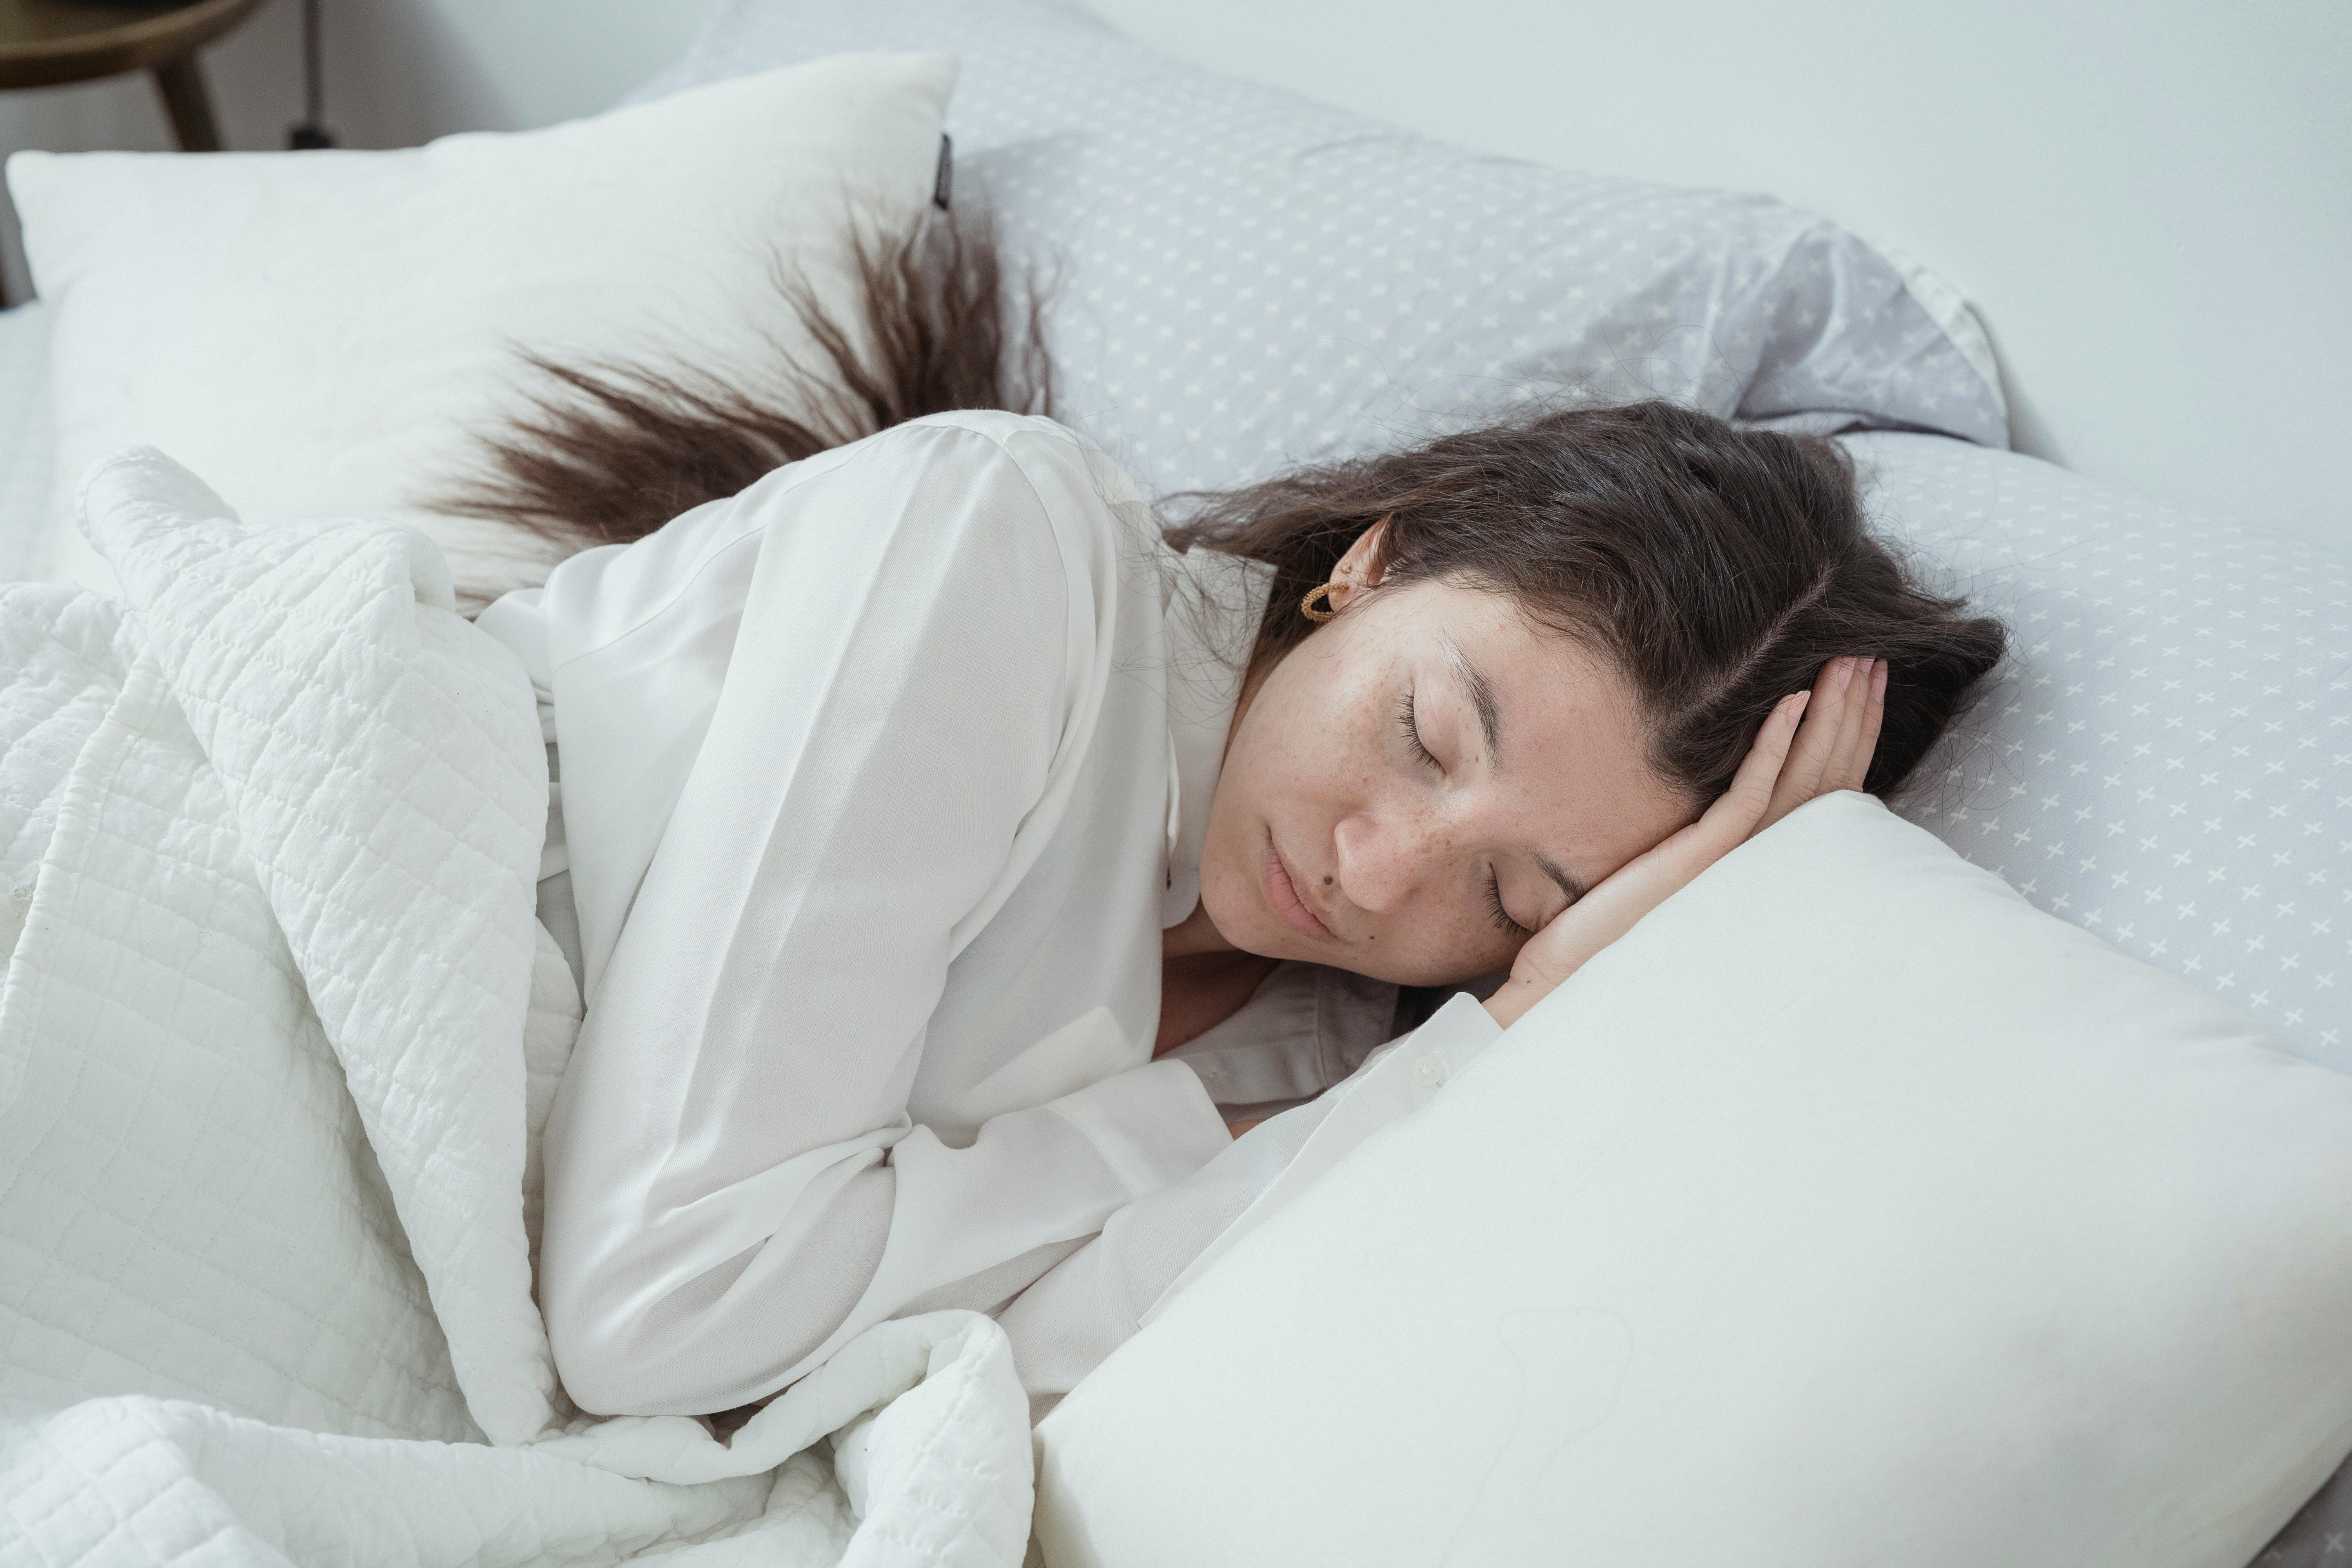 Sleepy woman sleeping in the bed. Stock Photo by ©Voyagerix 112119524